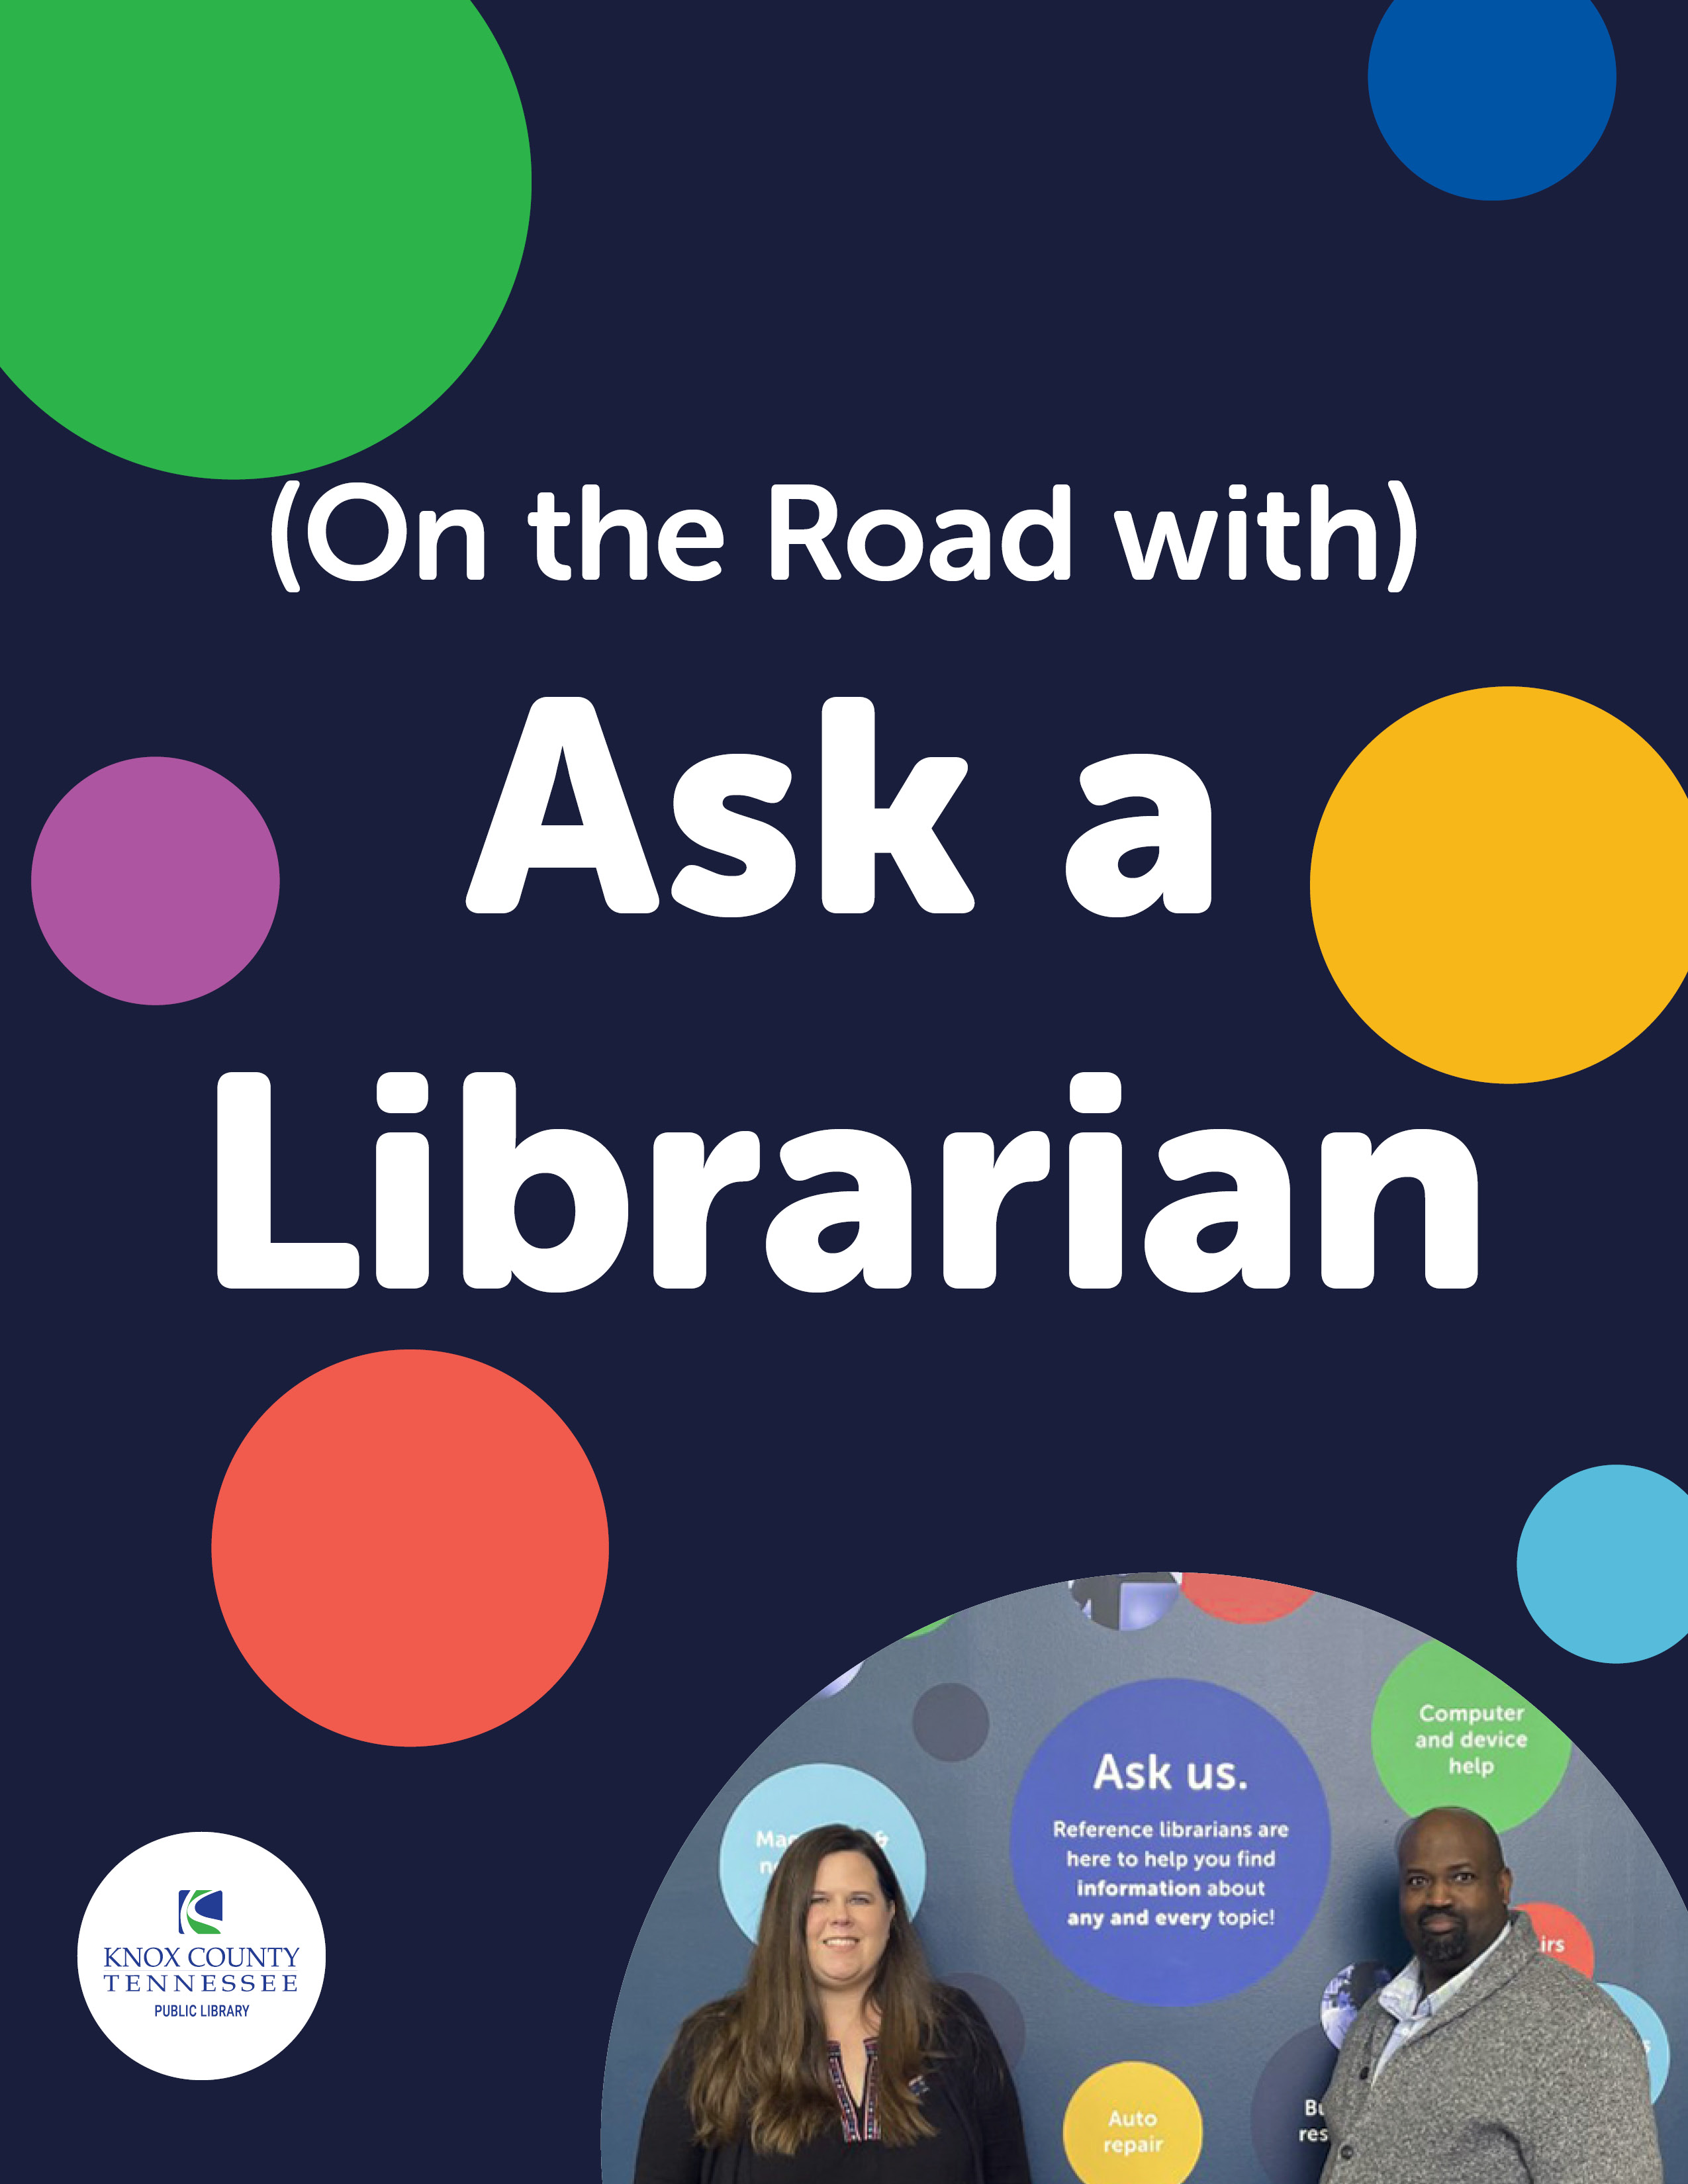 On the Road with Ask a Librarian, photo of two librarians with "Ask us"